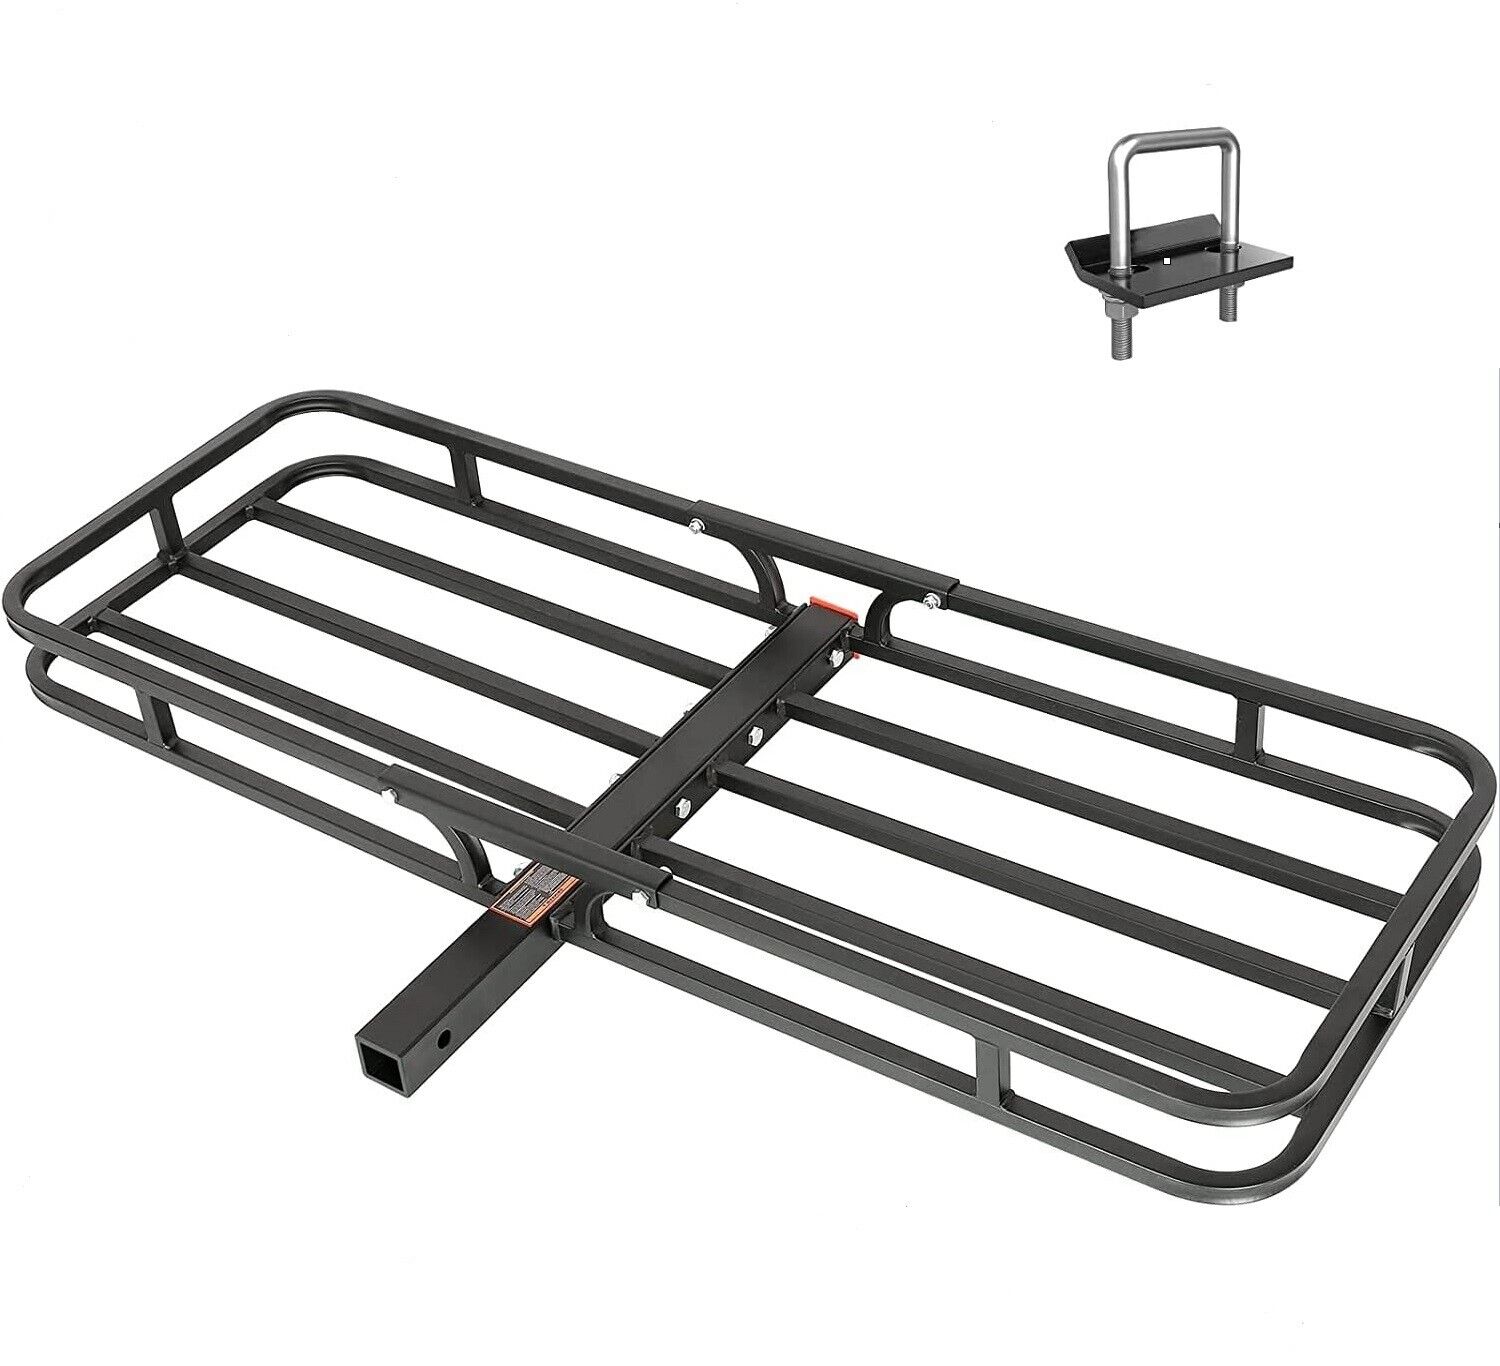 WEIZE 500lbs Hitch Mount Cargo Carrier Basket Fit 2'' Receiver for Car SUV Truck